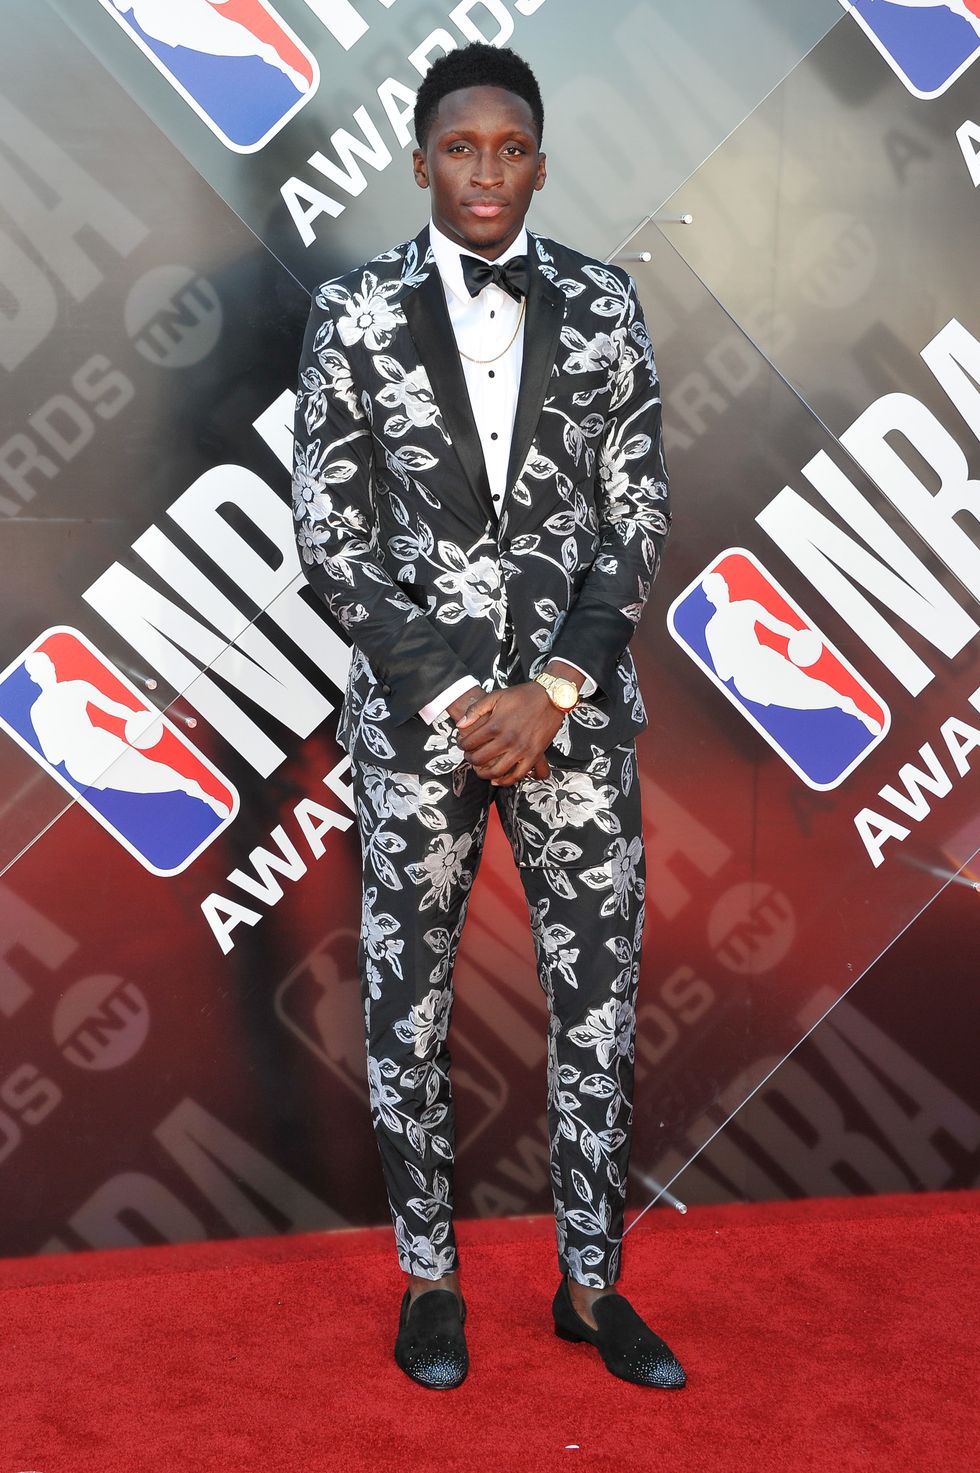 Turner Sports, NBA To Live Stream The NBA Awards: Red Carpet LIVE